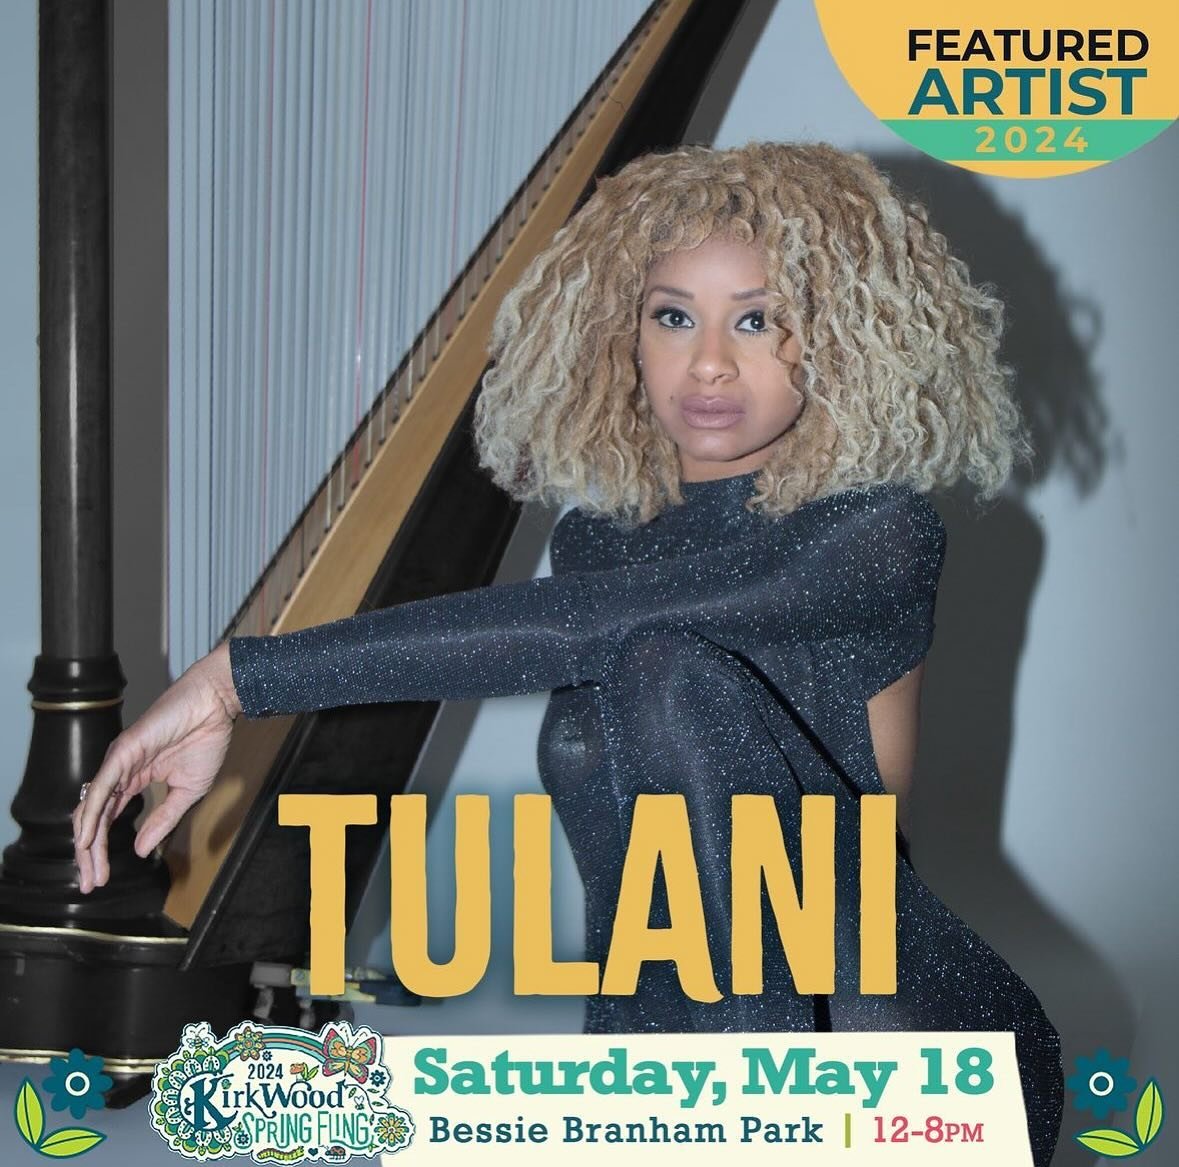 ATL!!!! Come out tomorrow May 18 to @kirkwoodfling from 12pm - 8pm I&rsquo;ll be one of the featured artist performing on the 2024 Kirkwood Spring Fling stage! 💃🏽🎉🎉🎉💃🏽

#Tulani #kirkwoodspringfling